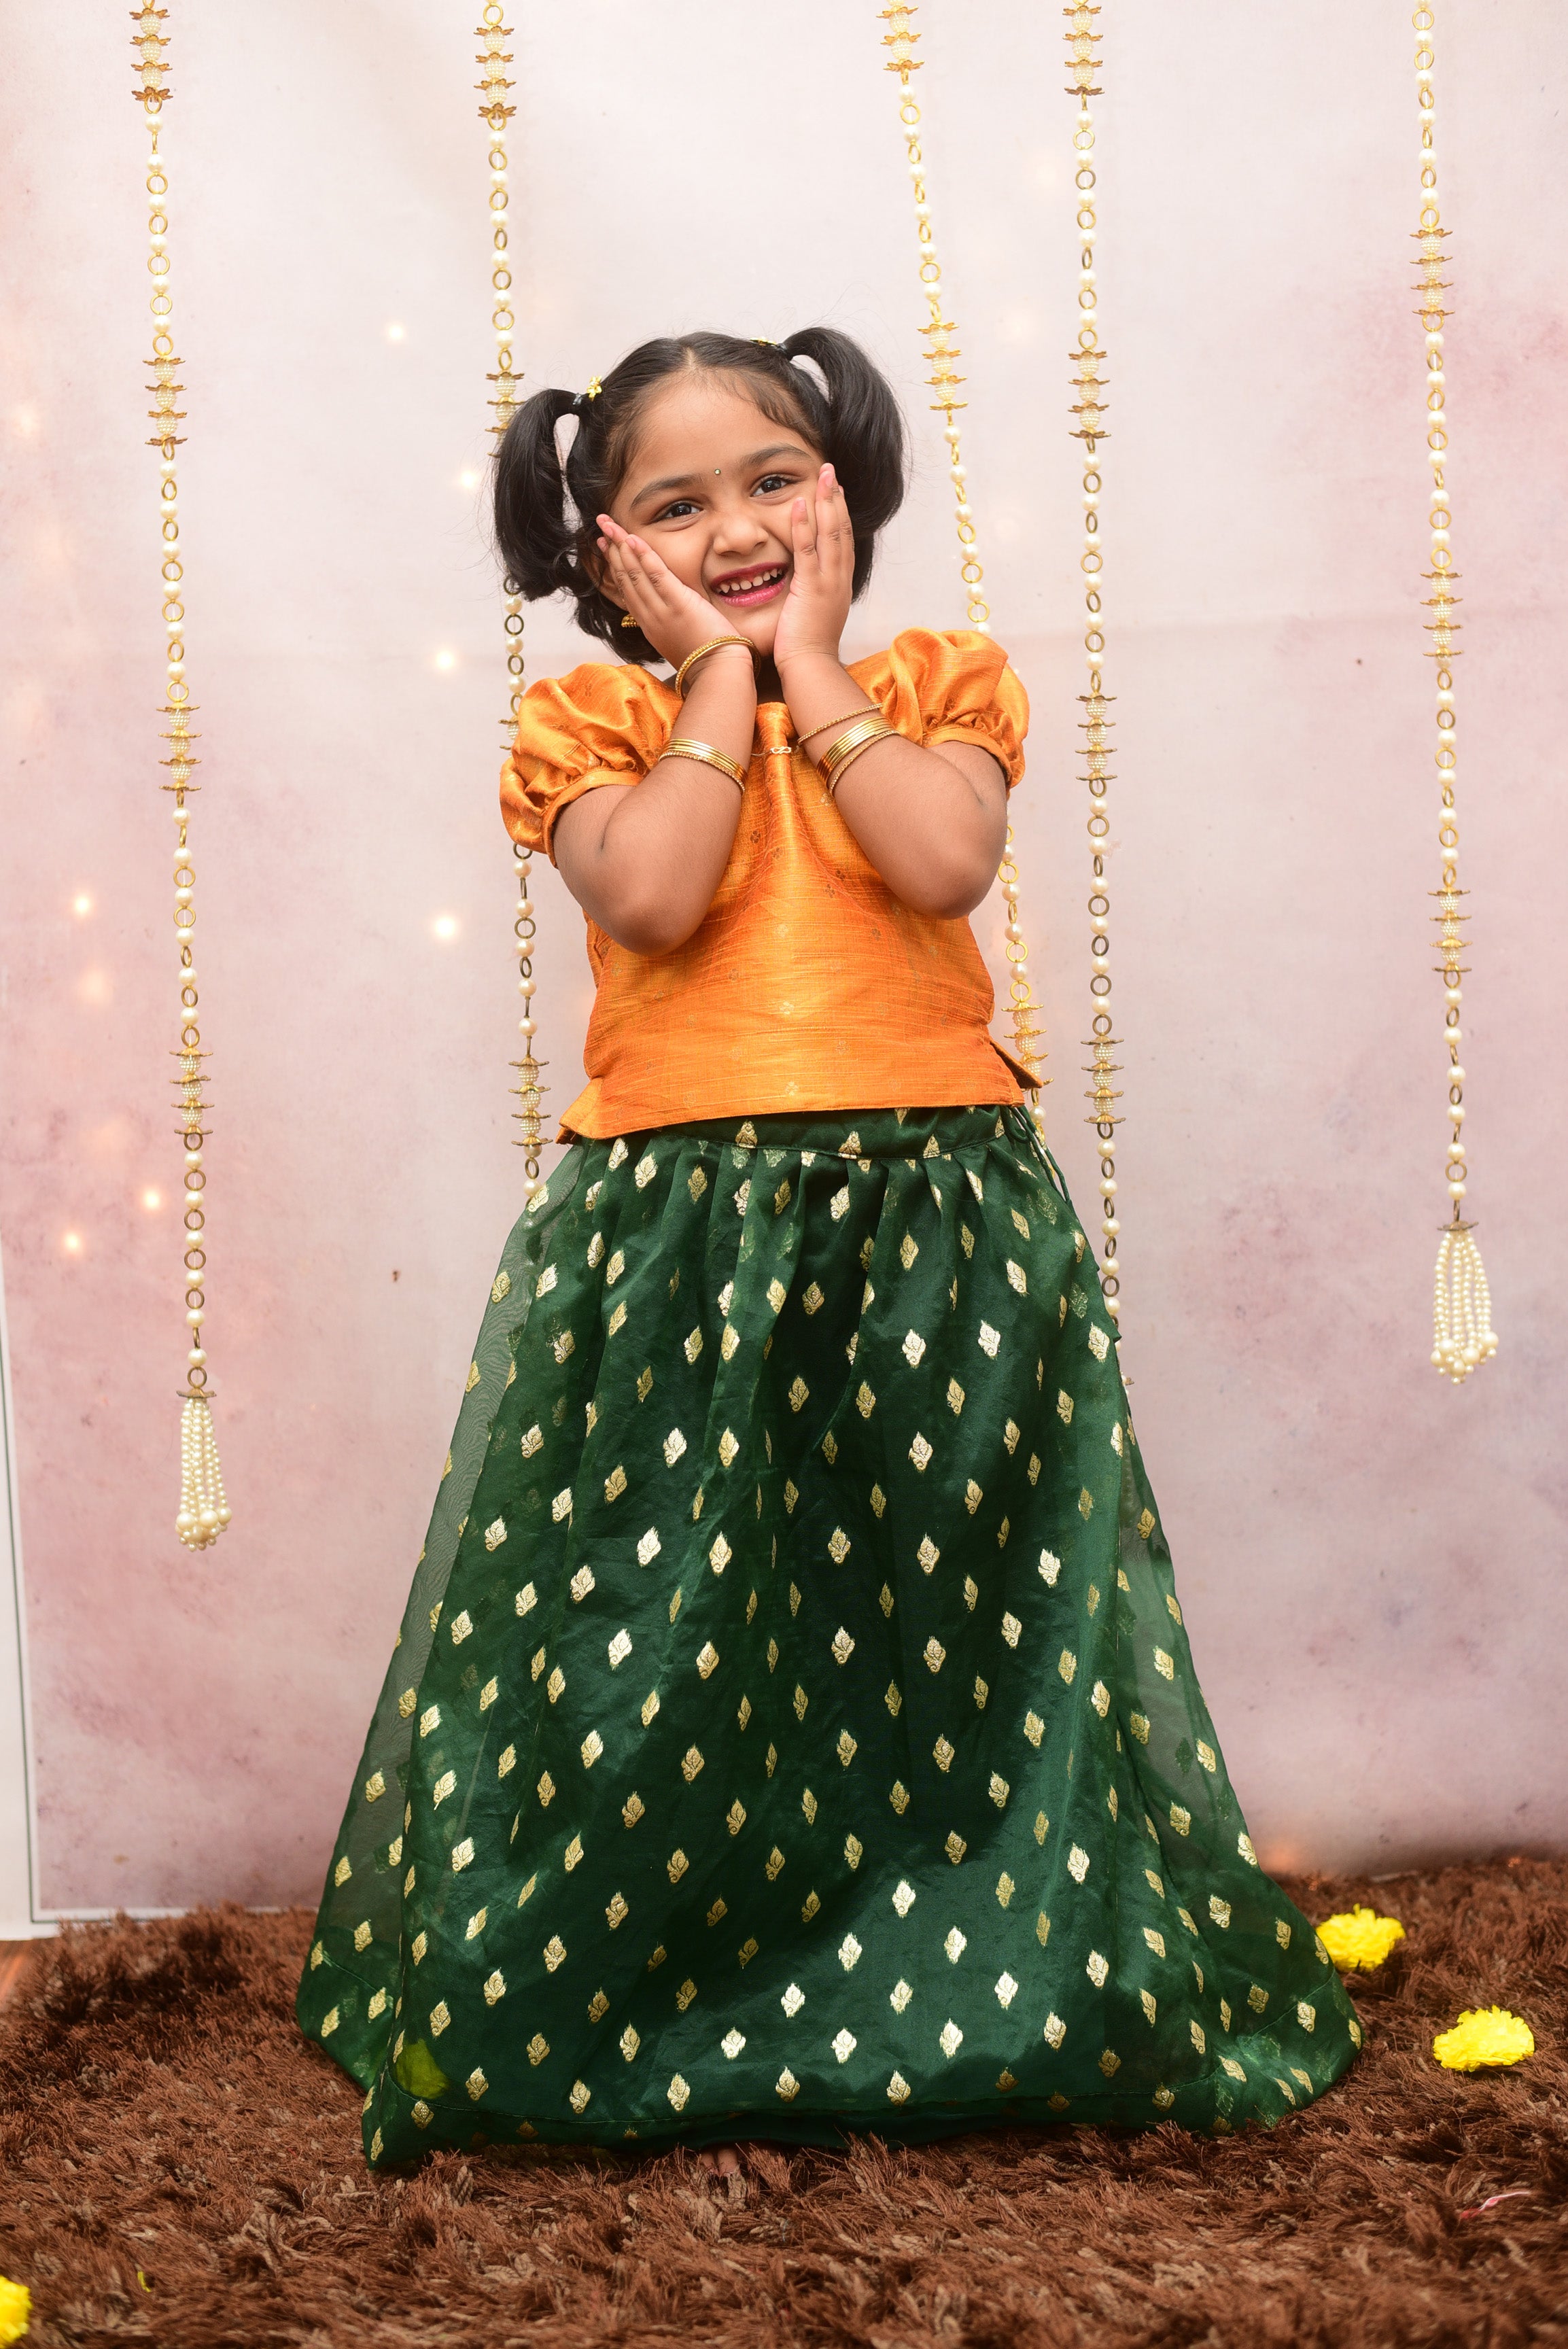 Find stylish yellow outfits, designer party dresses & cute ethnic wear for your baby girl. Shop our selection of trendy infant clothes, newborn outfits & girls dresses at best price.